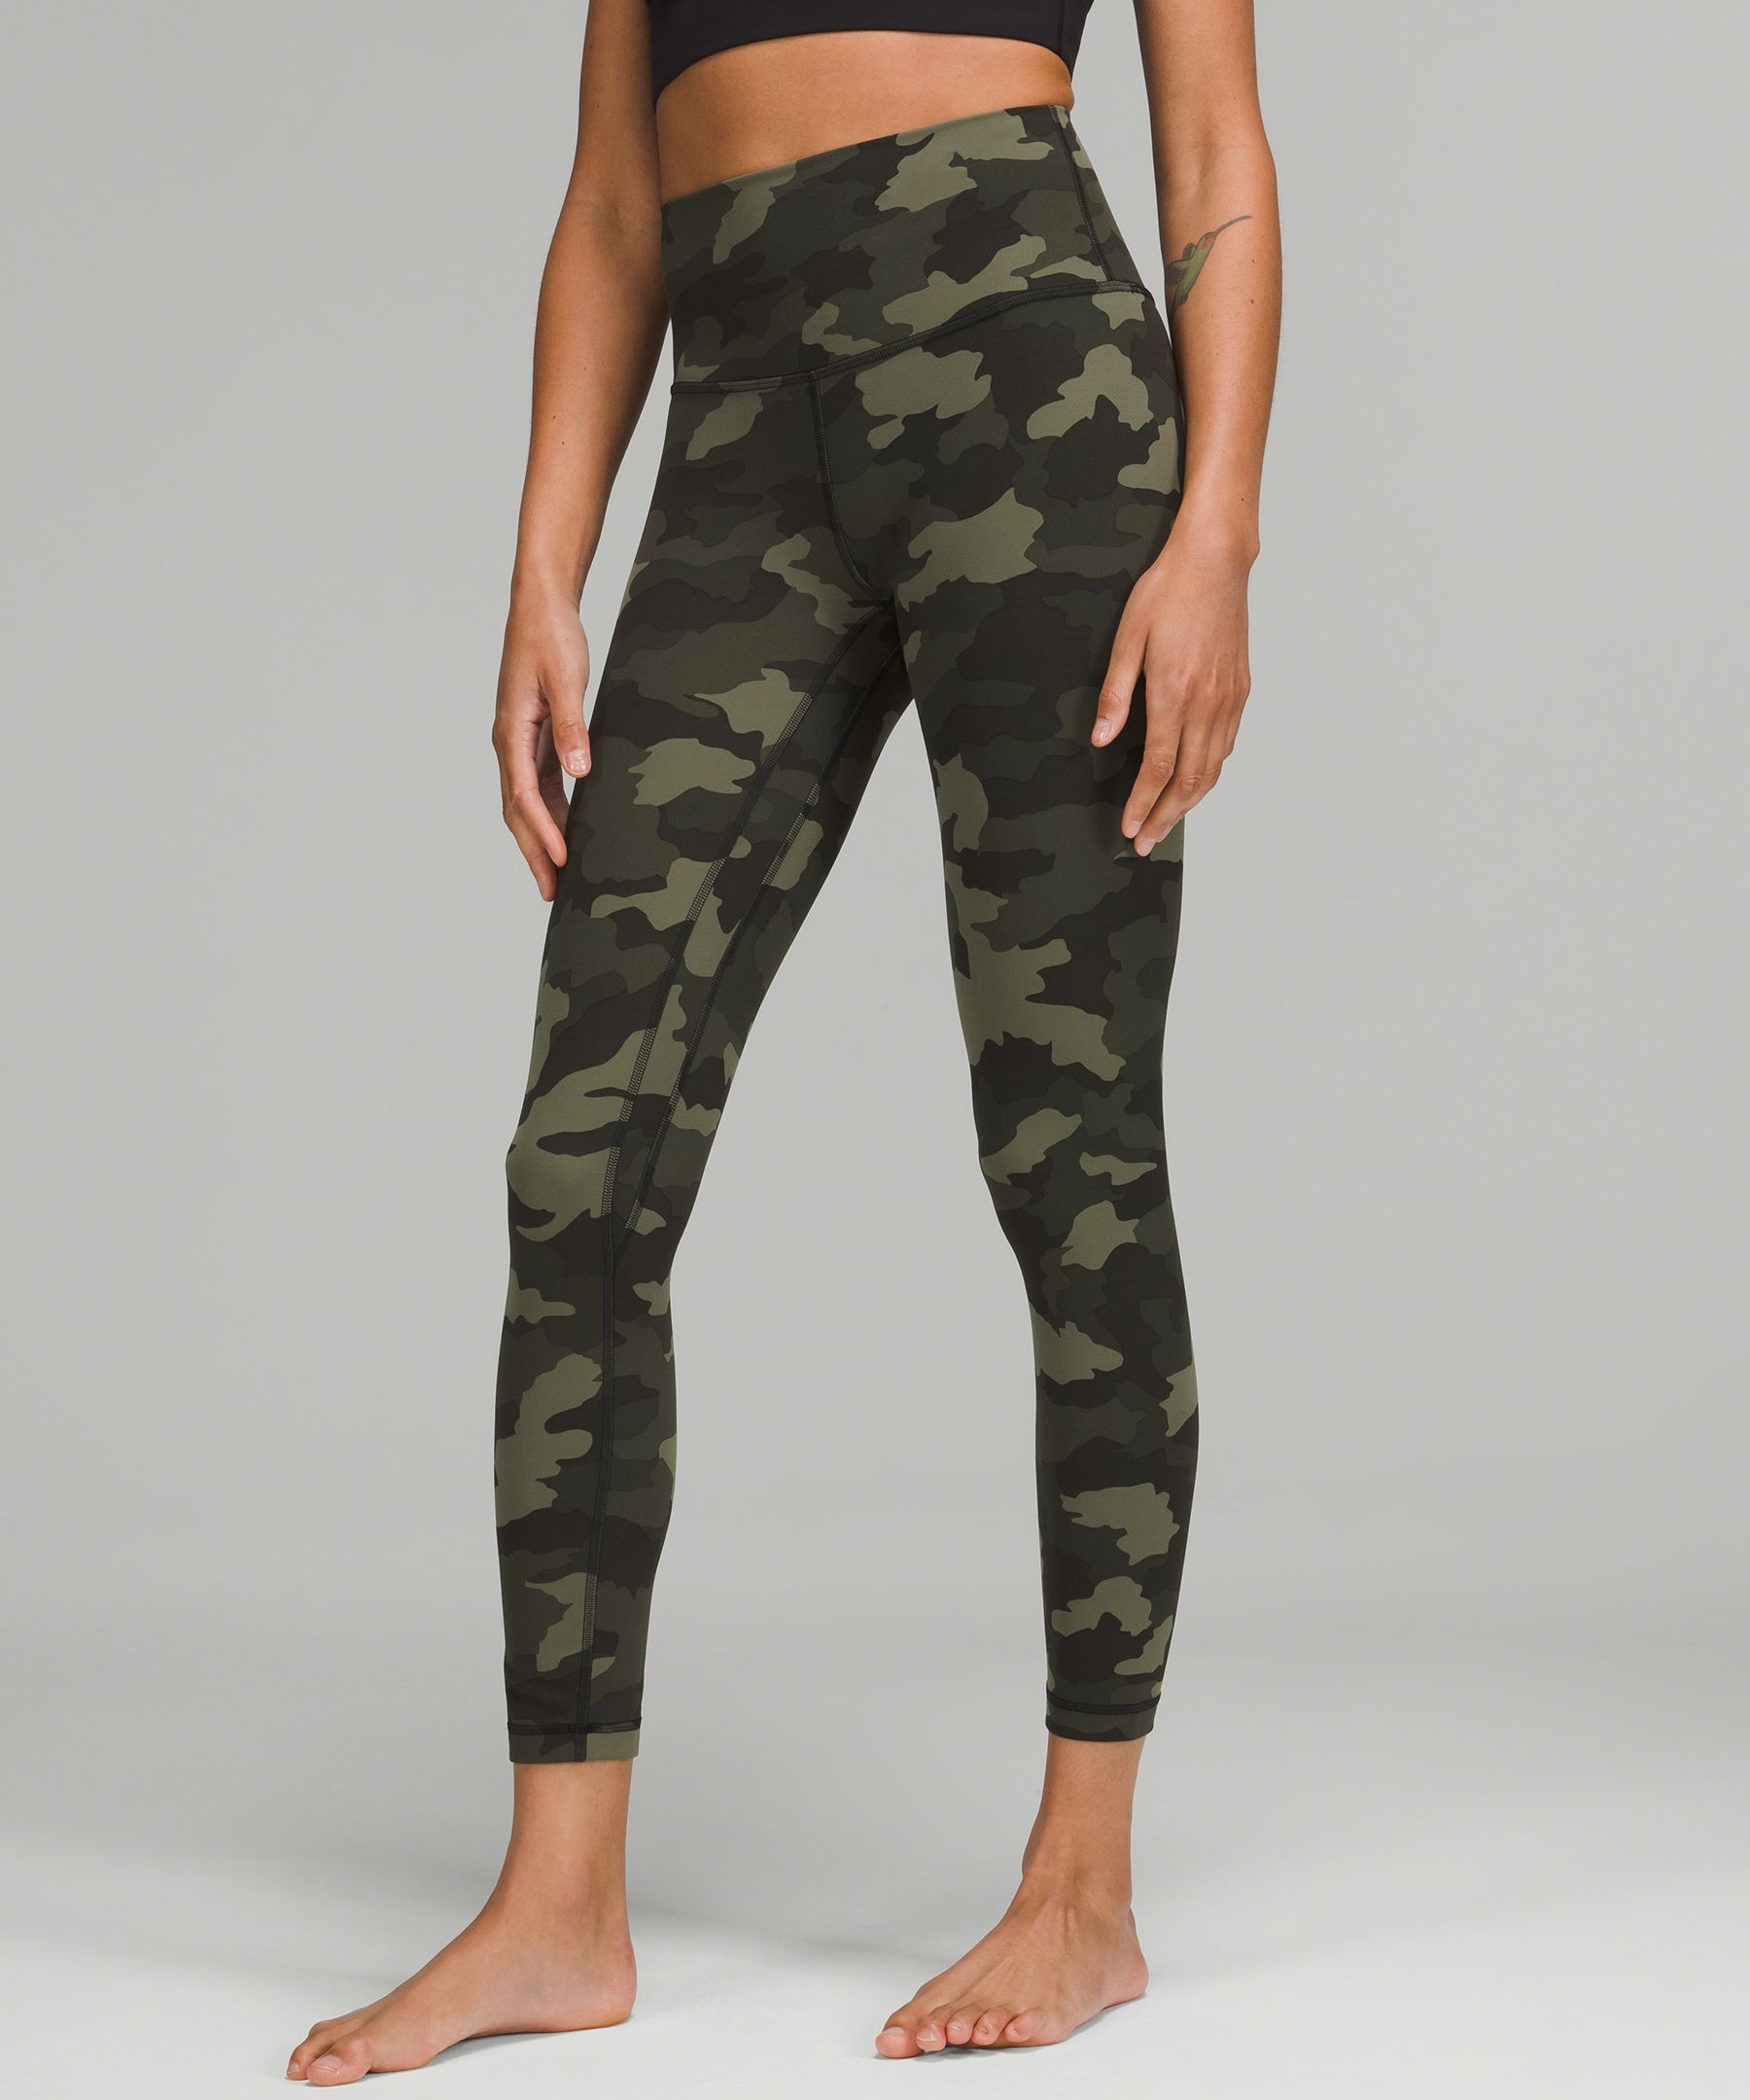 Lululemon Align™ High-rise Pants 25 In Heritage 365 Camo Tidewater Teal